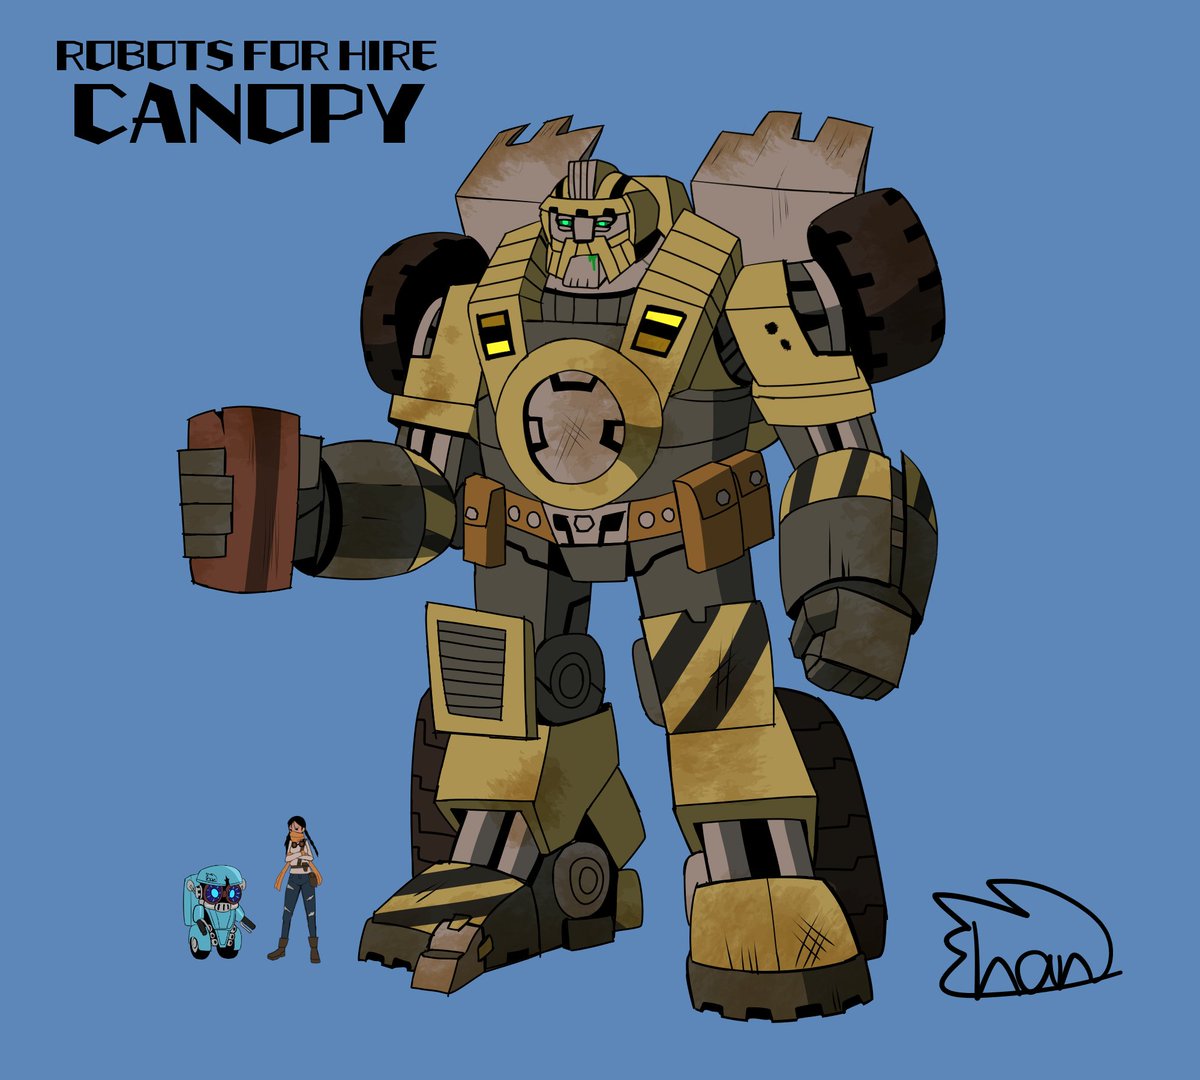 TF Integrated
CANOPY
One the neutral Cybertronians on Earth, he lives in a junkyard with Bulkhead, Trench, Izzy and Scrapmetal.

#transformers #maccadam